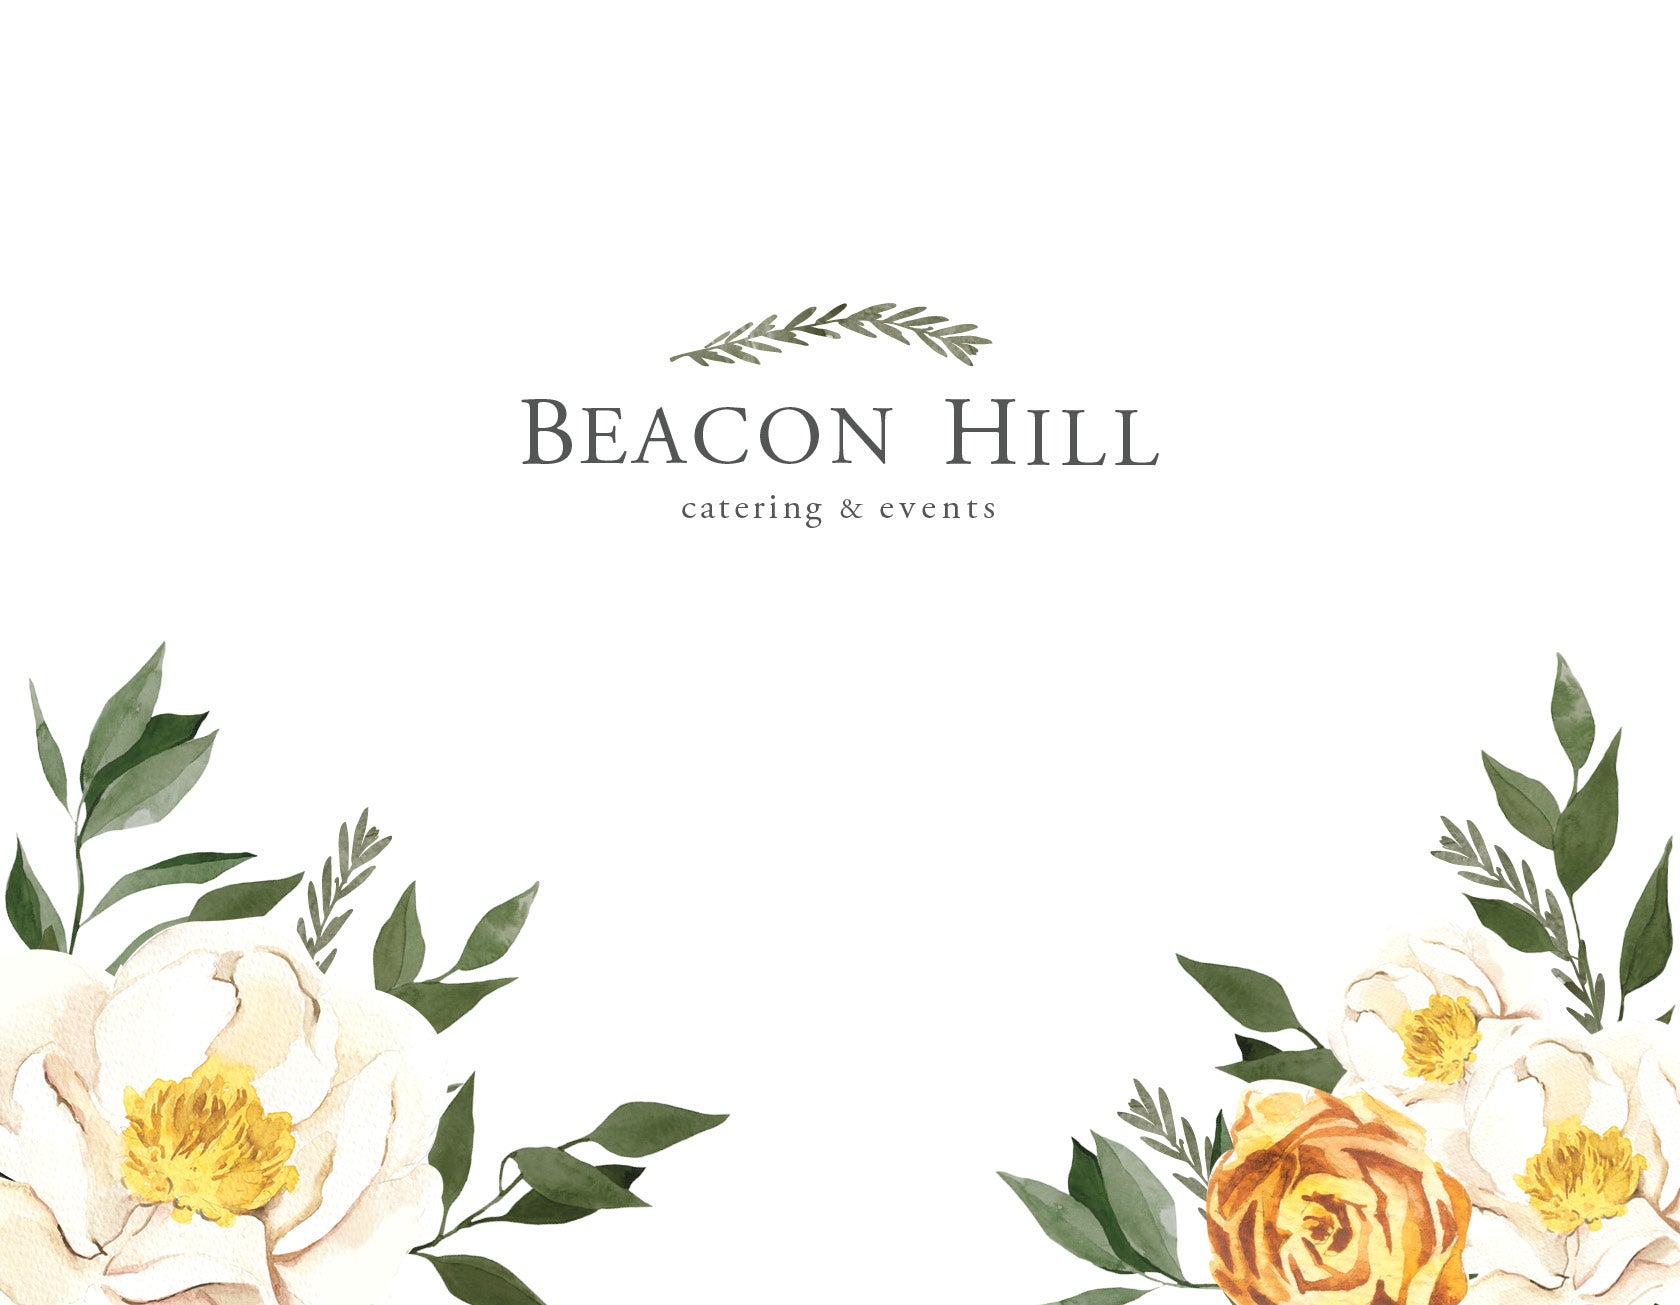 Beacon Hill Events  Spokane Events - Beacon Hill Catering and Events